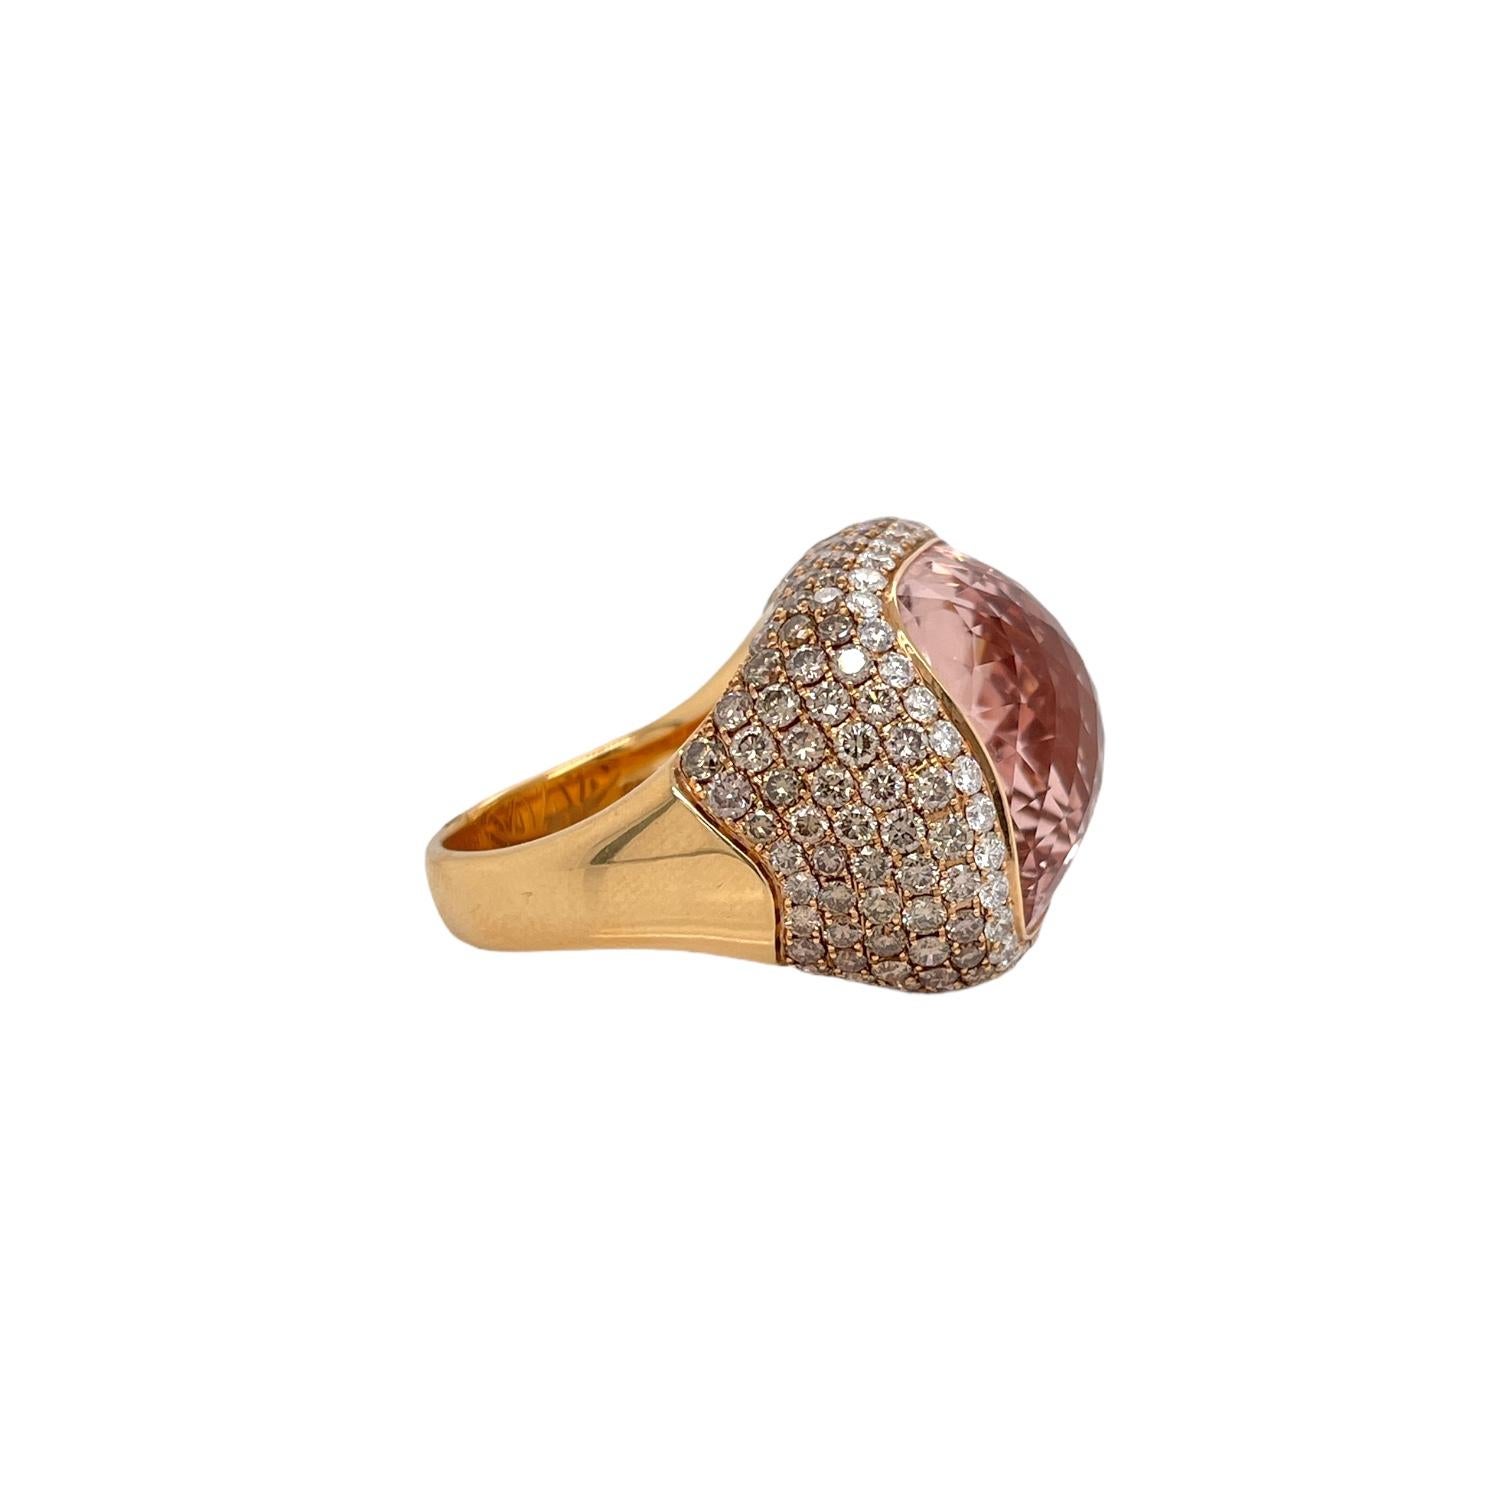 Morganite & champagne diamond cocktail ring 18k rose gold. Ring contains 1 large checkerboard cut cushion shape morganite, 20.92ct. Center stone is accented by round champagne diamonds, 3.80tcw and white round brilliant diamonds, 0.72tcw. Morganite